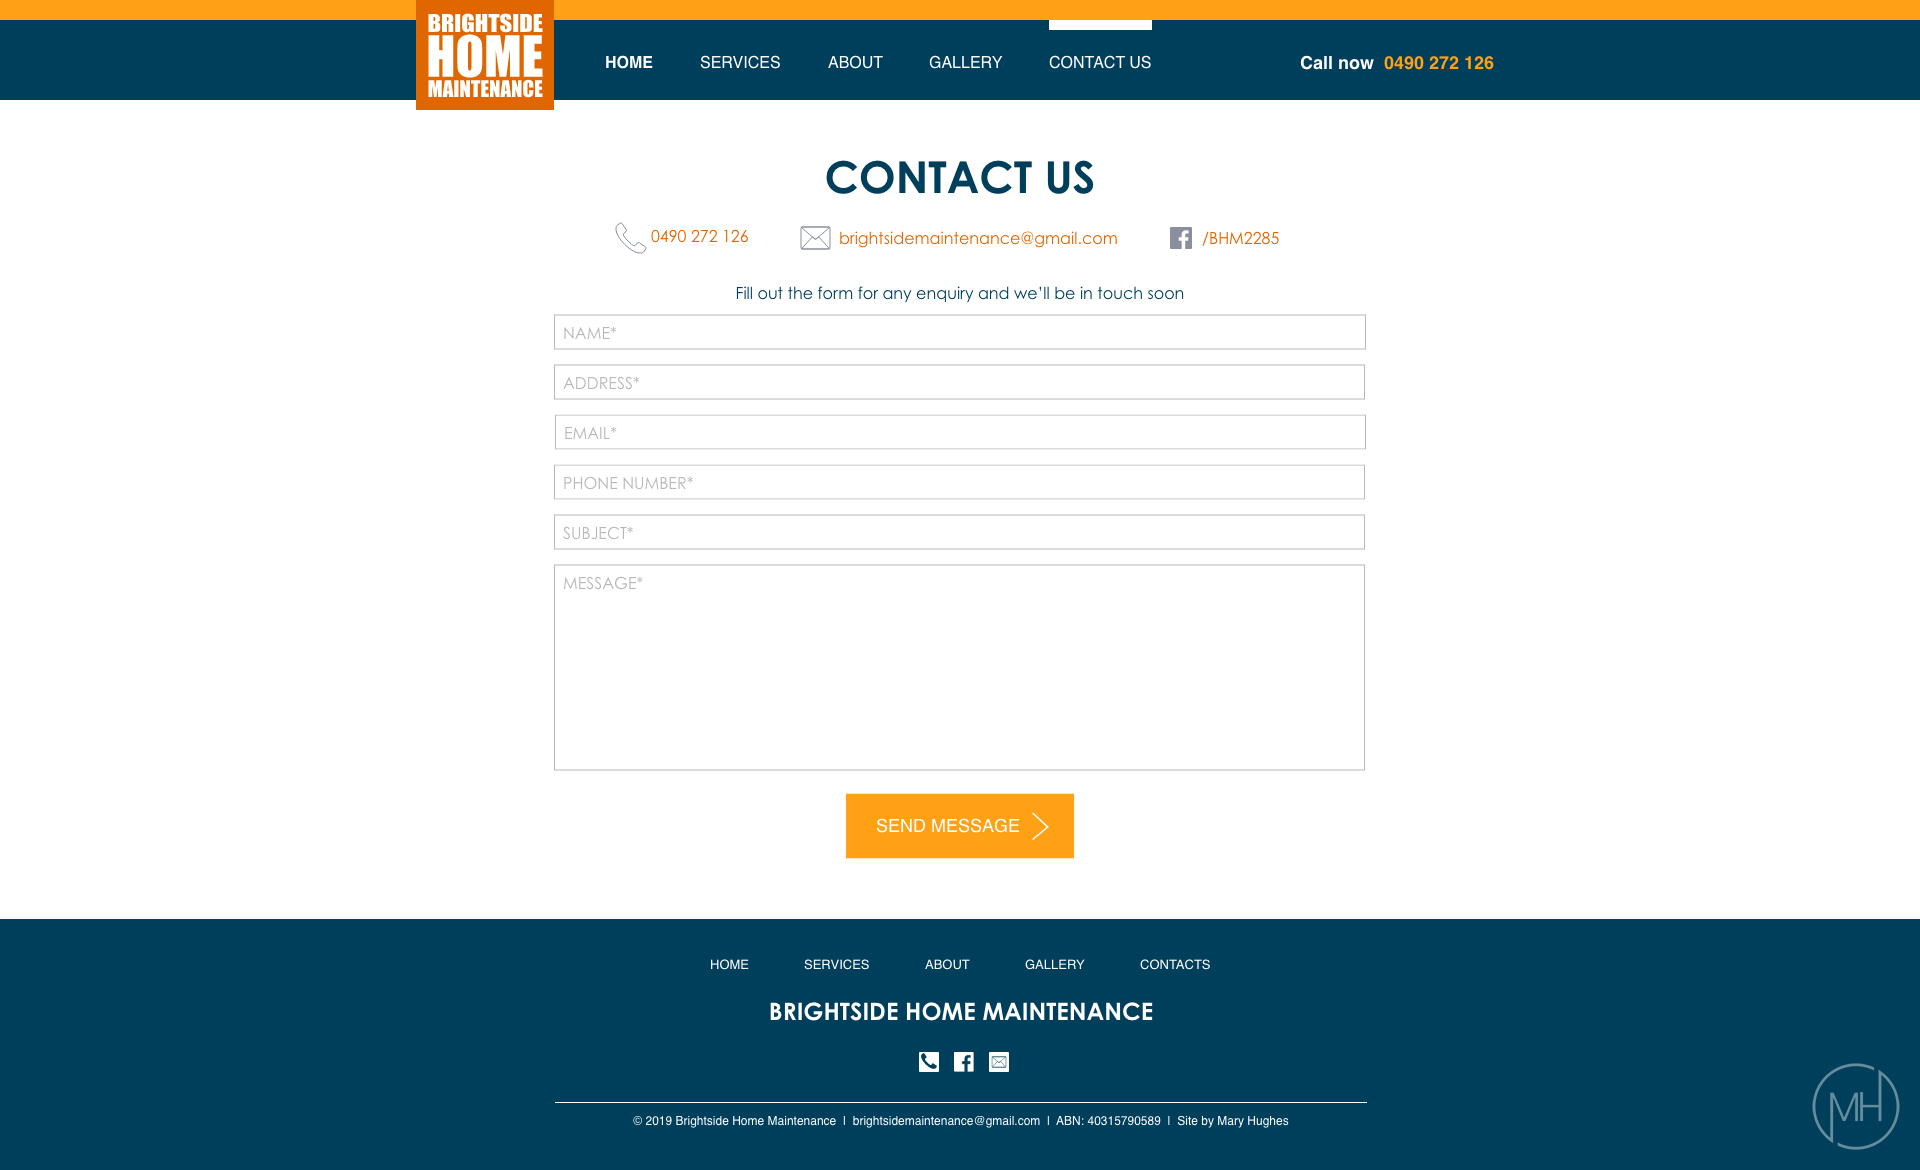 Contact page